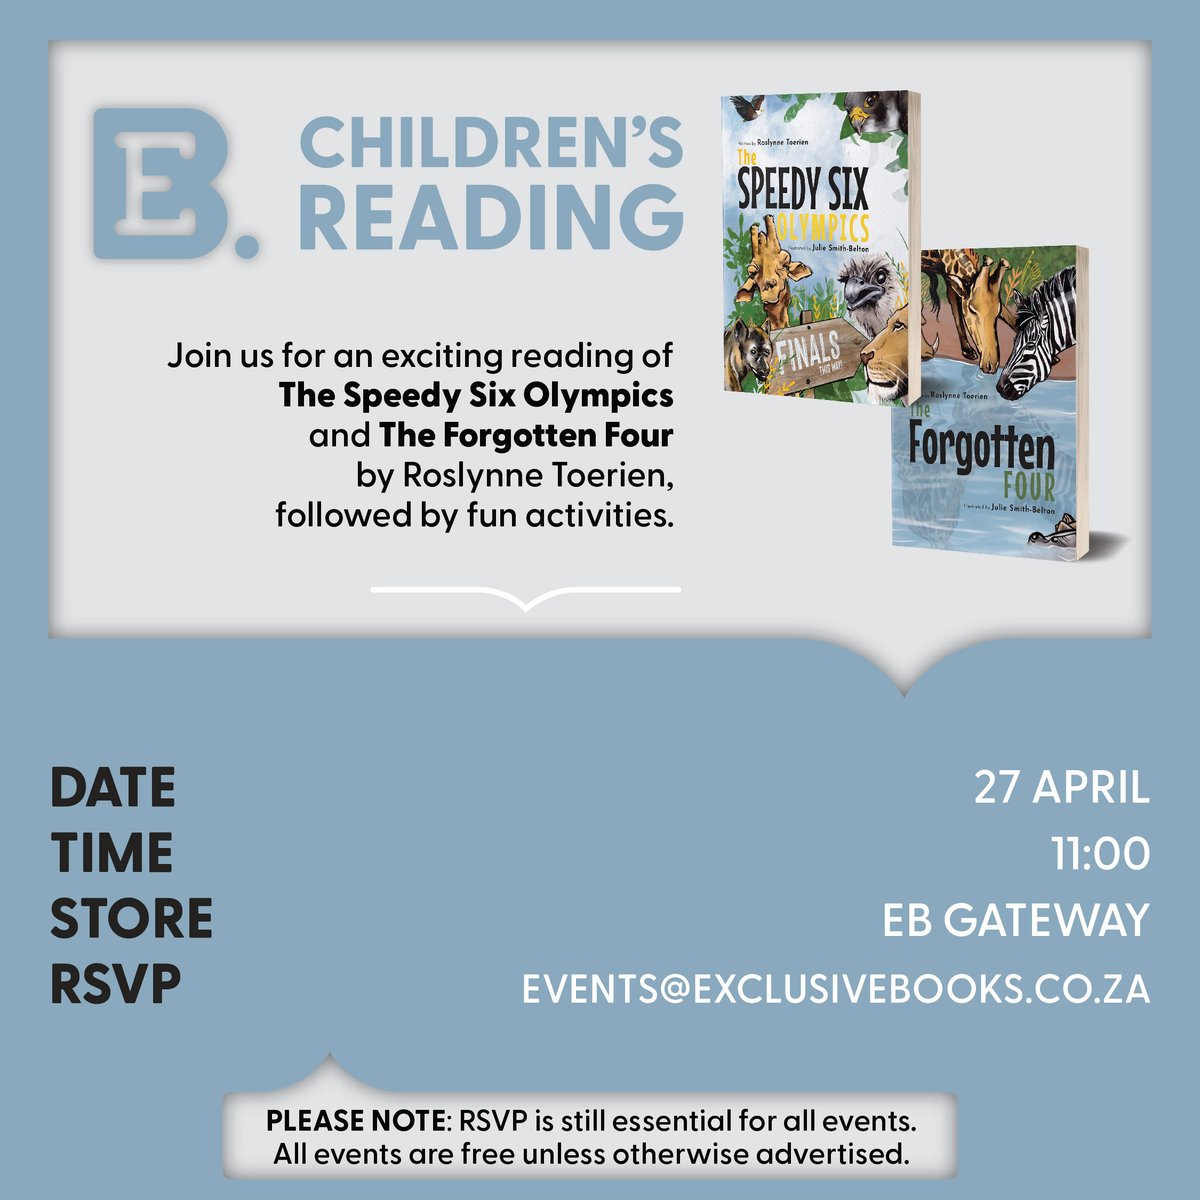 📍🗓️ Join us at EB @GatewayUmhlanga for an exciting children's reading for The Speedy Six Olympics and The Forgotten Four by Roslynne Toerien! @PenguinBooksSA RSVP to events@exclusivebooks.co.za